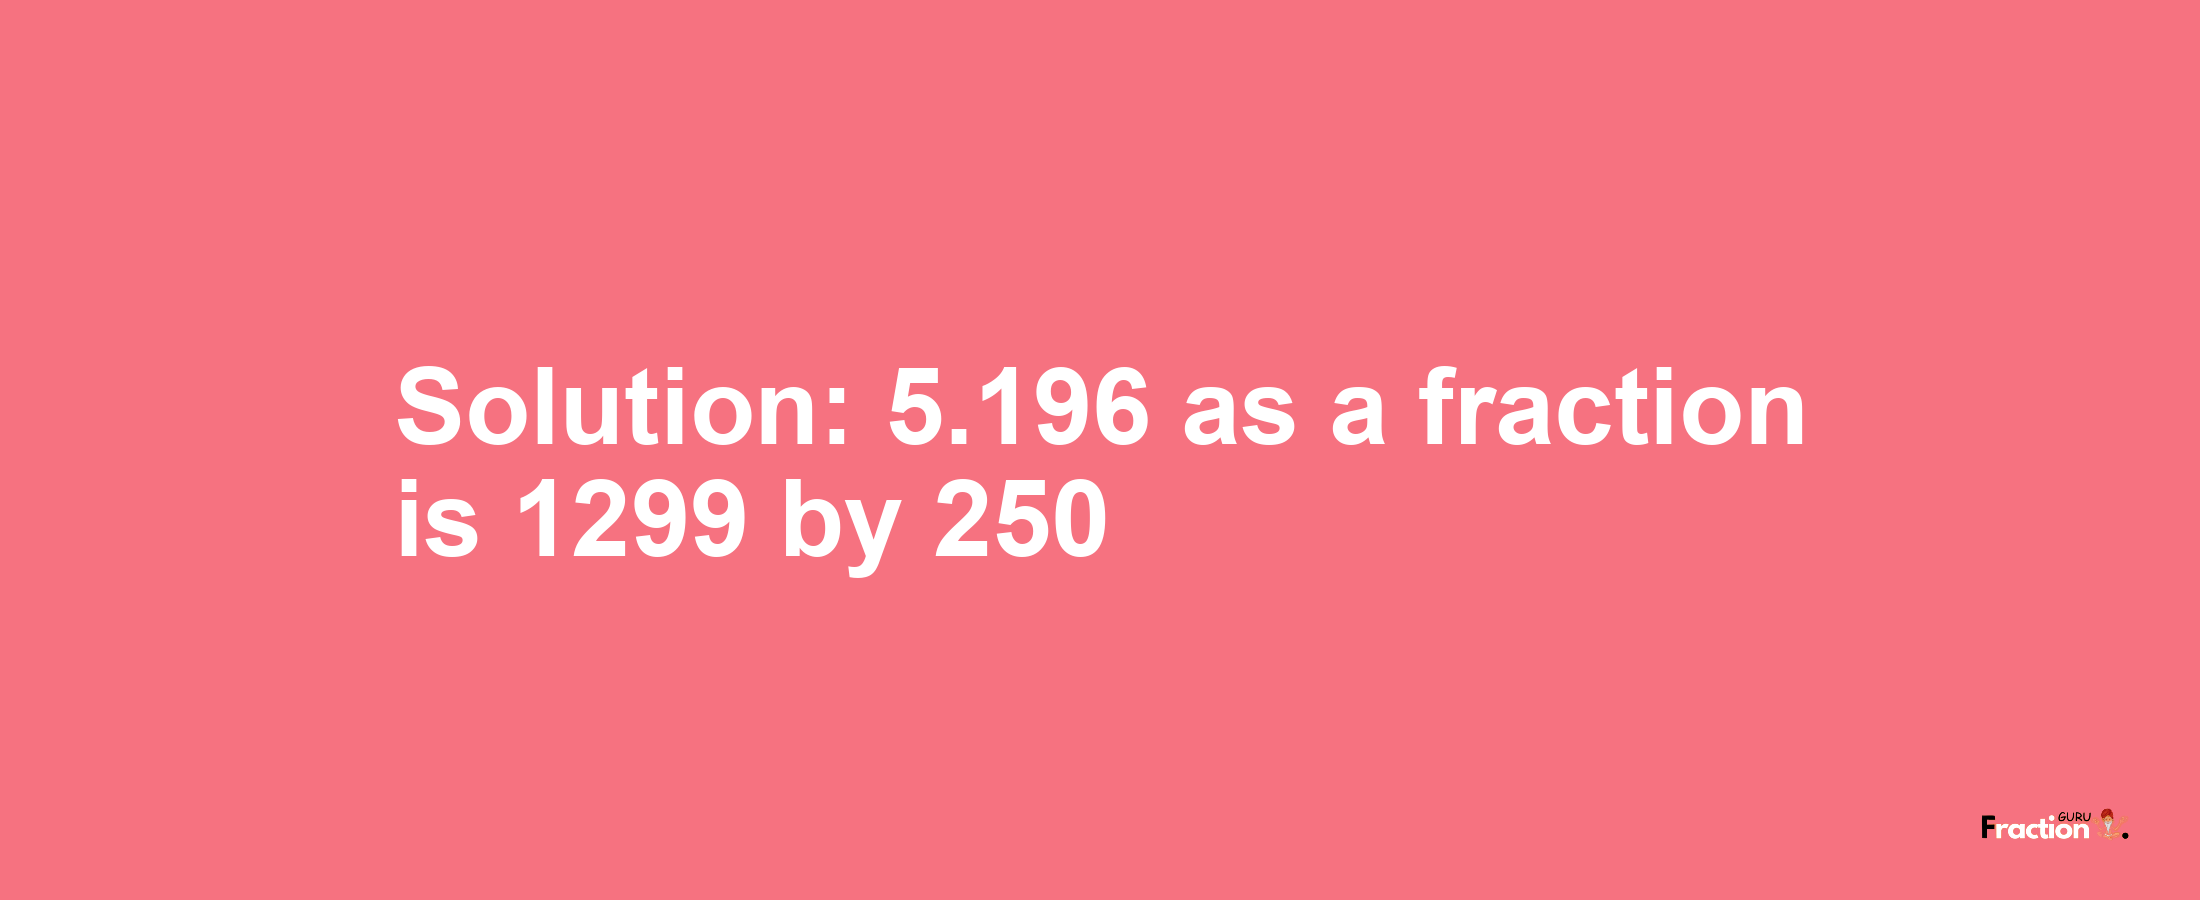 Solution:5.196 as a fraction is 1299/250